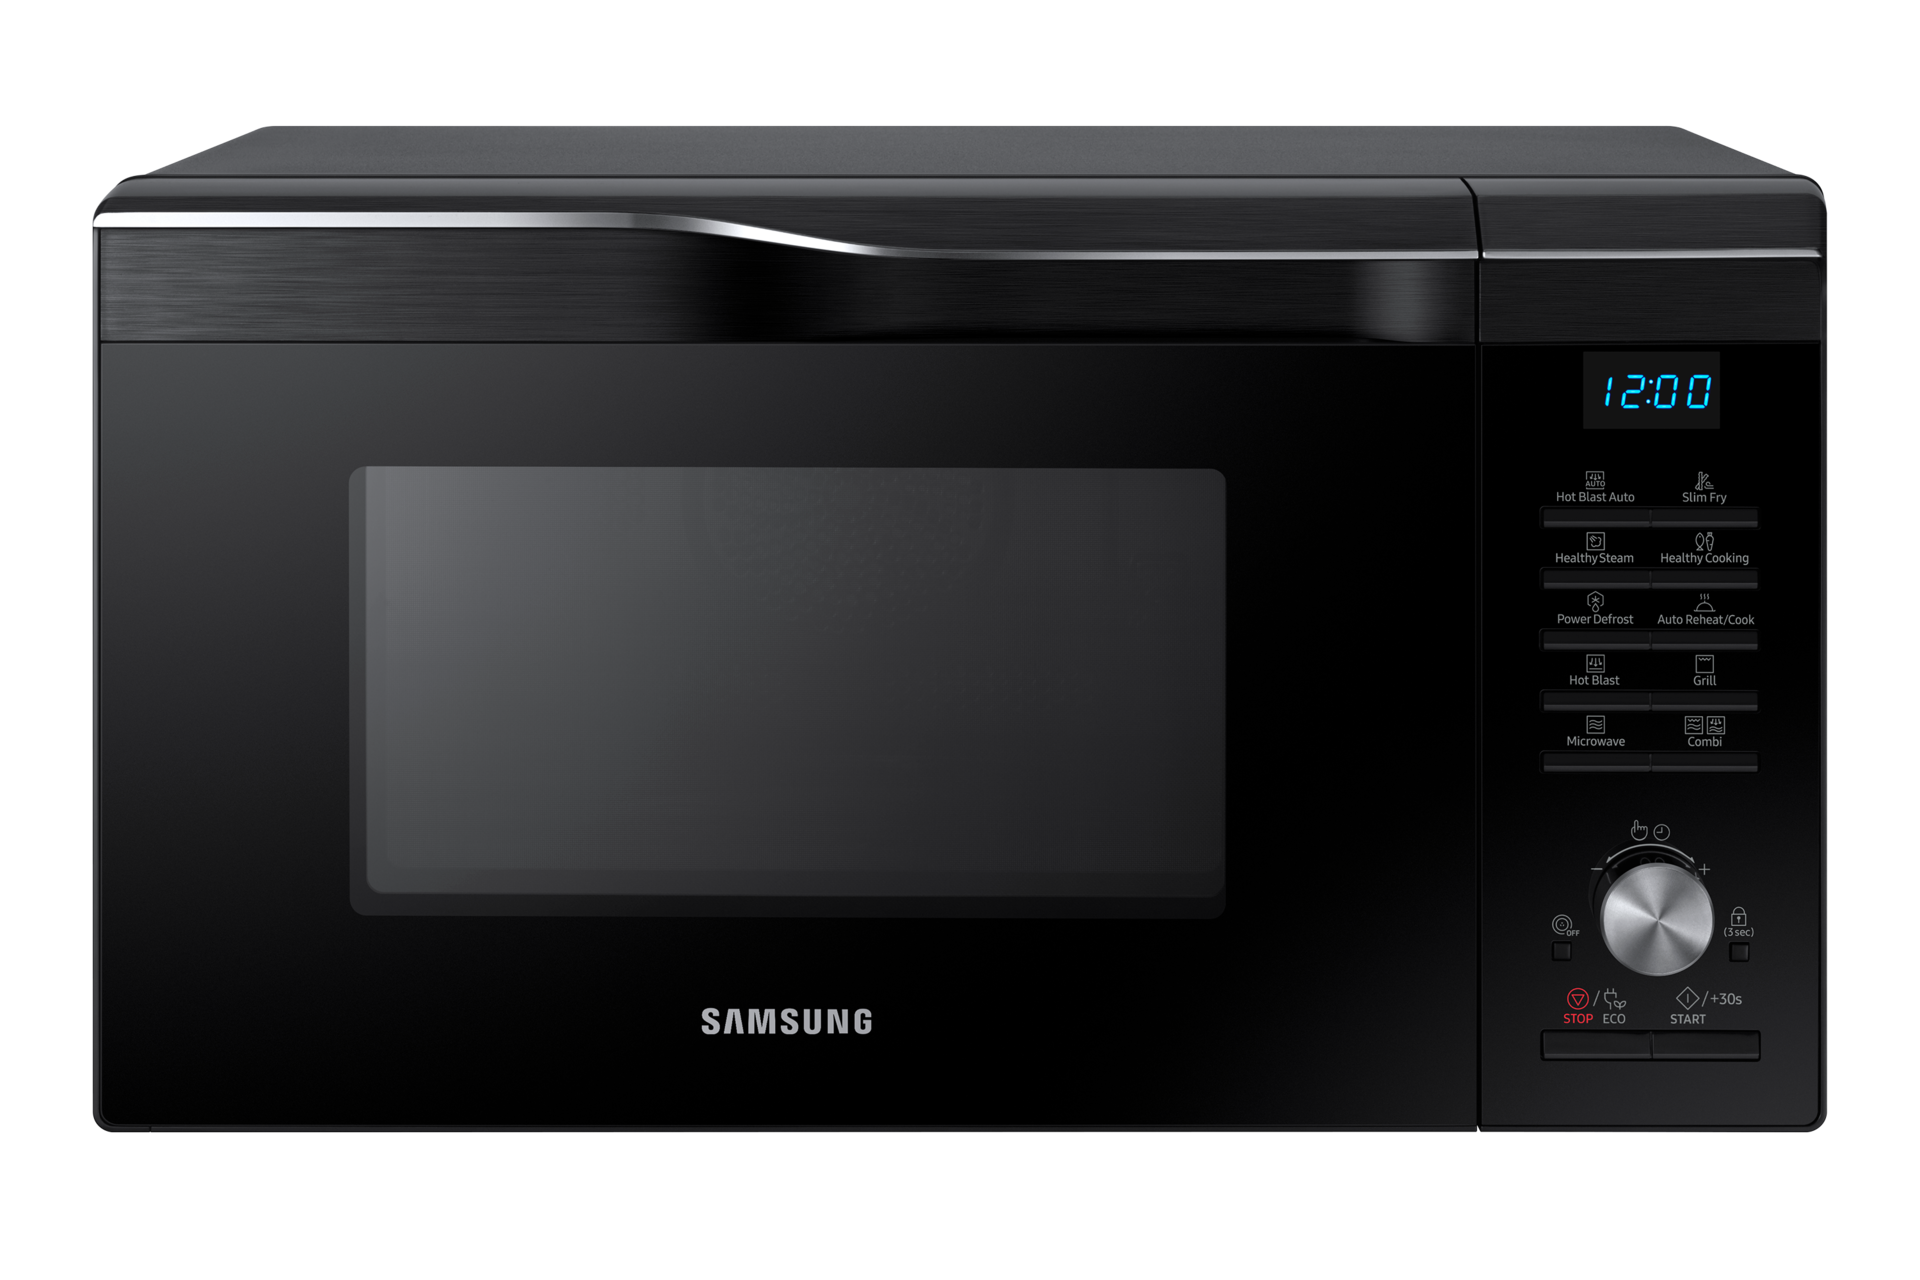 Samsung 28L Microwave: Healthy Cooking | Price in Malaysia